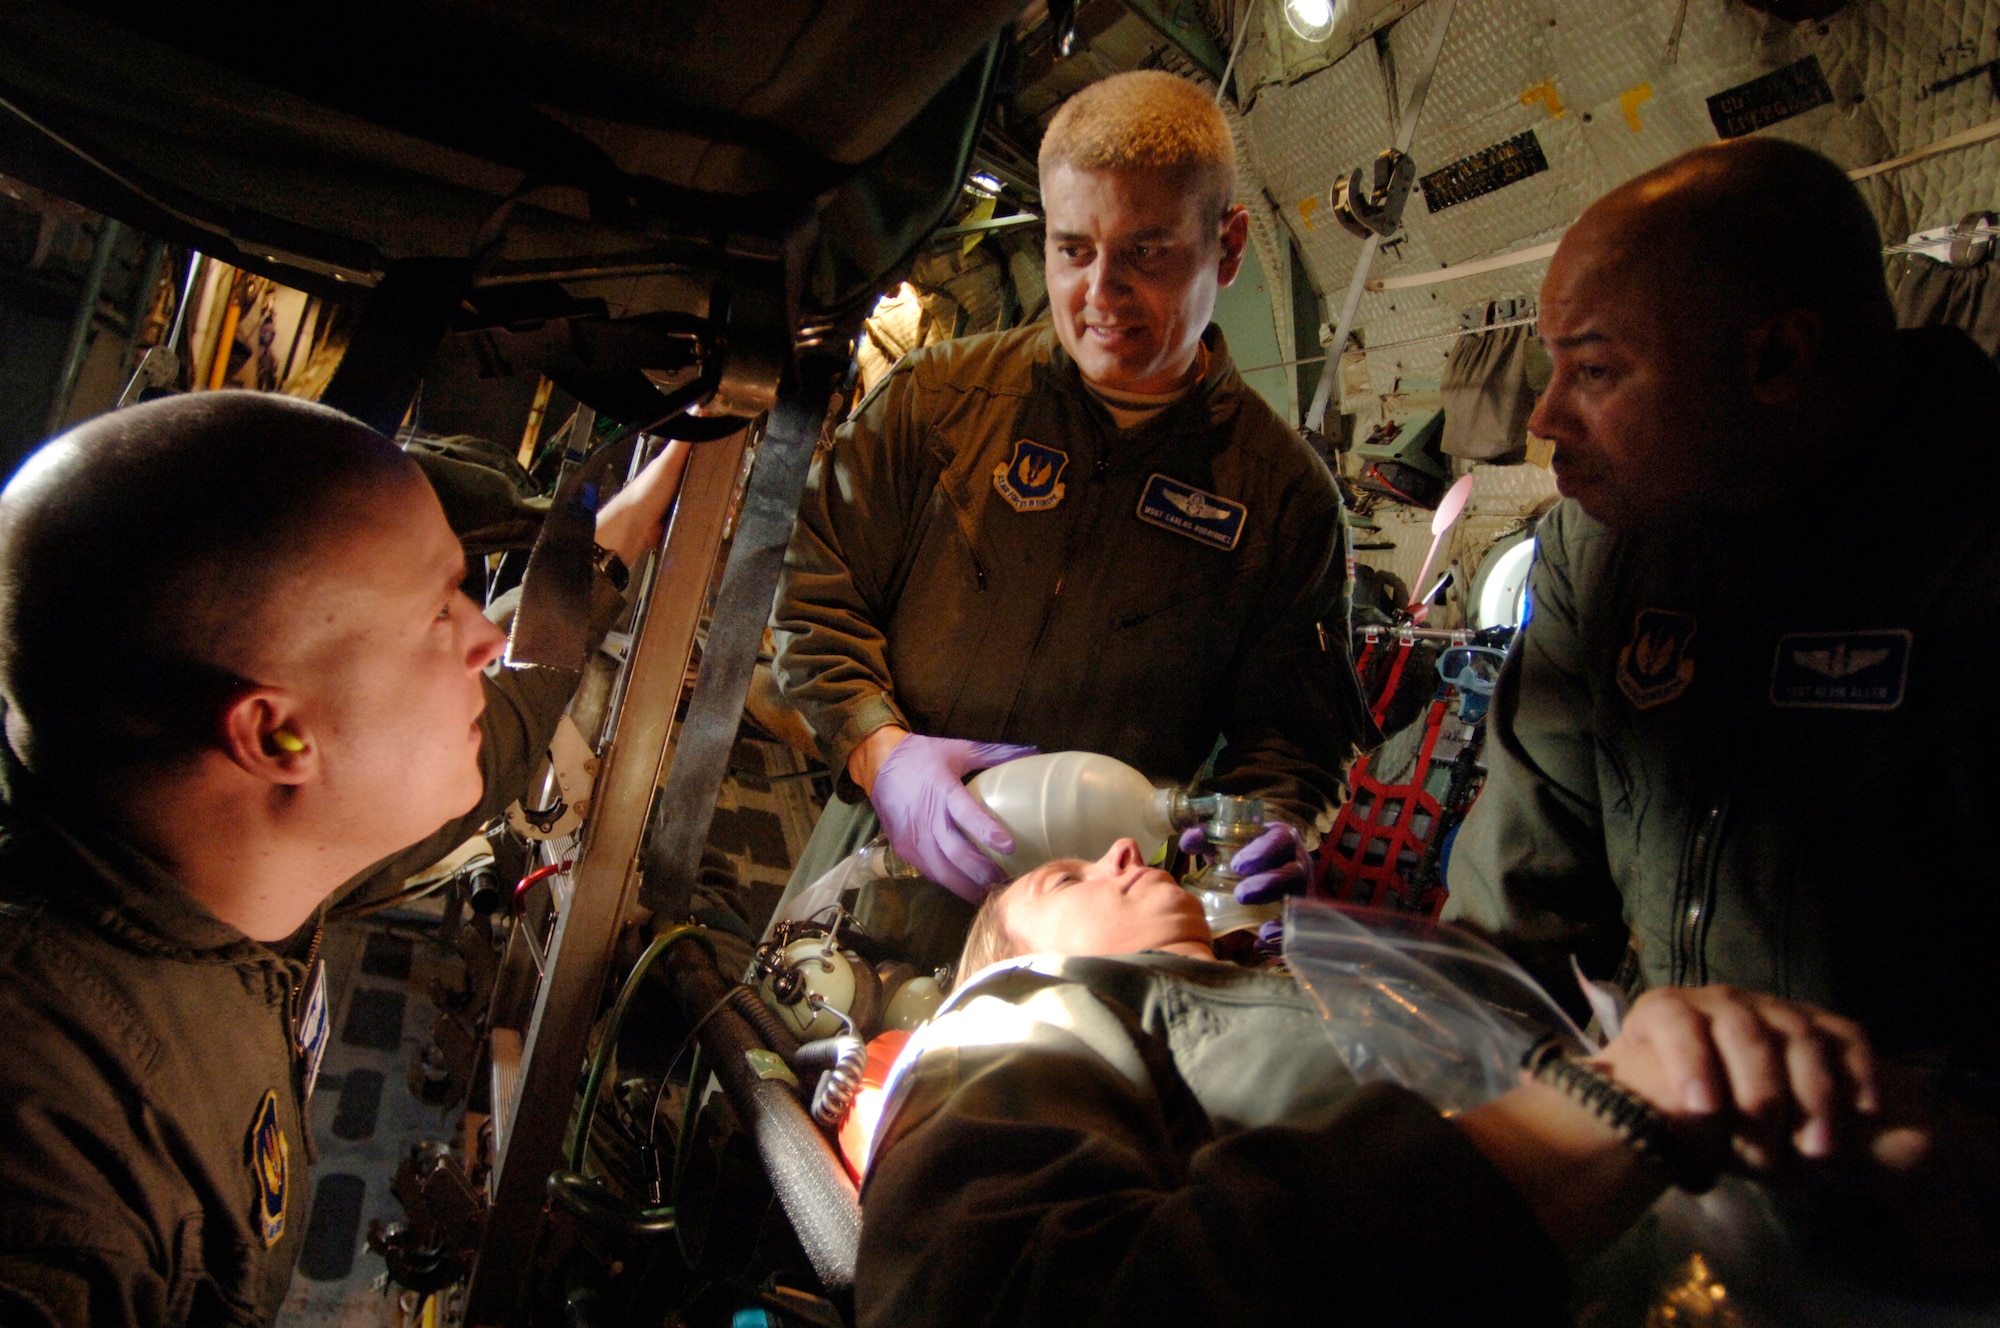 During an aeromedical evacuation training sortie on a C-130 Hercules flying over southern Germany, Tech. Sgt. Tommy Mattox (center), aerospace medical technician, describes symptoms of an anaphylactic shock "patient" to fellow healthcare providers Master Sgt. Carlos Rodriguez (left) and Tech. Sgt. Kevin Allen (right) who, along with a cadre of flight nurses, were being evaluated on the speed and quality of patient care., Capt. Stephanie Ellenburg, flight nurse instructor who is playing the role of the patient, was also evaluating the response of the medical team. The flight-qualified healthcare providers, assigned to the 86th Aeromedical Evacuation Squadron, fly weekly with Ramstein's 37th and 38th Airlift Squadron's C-130 fleet to remain proficient in their skills.  (Department of Defense photo by Master Sgt. Scott Wagers)